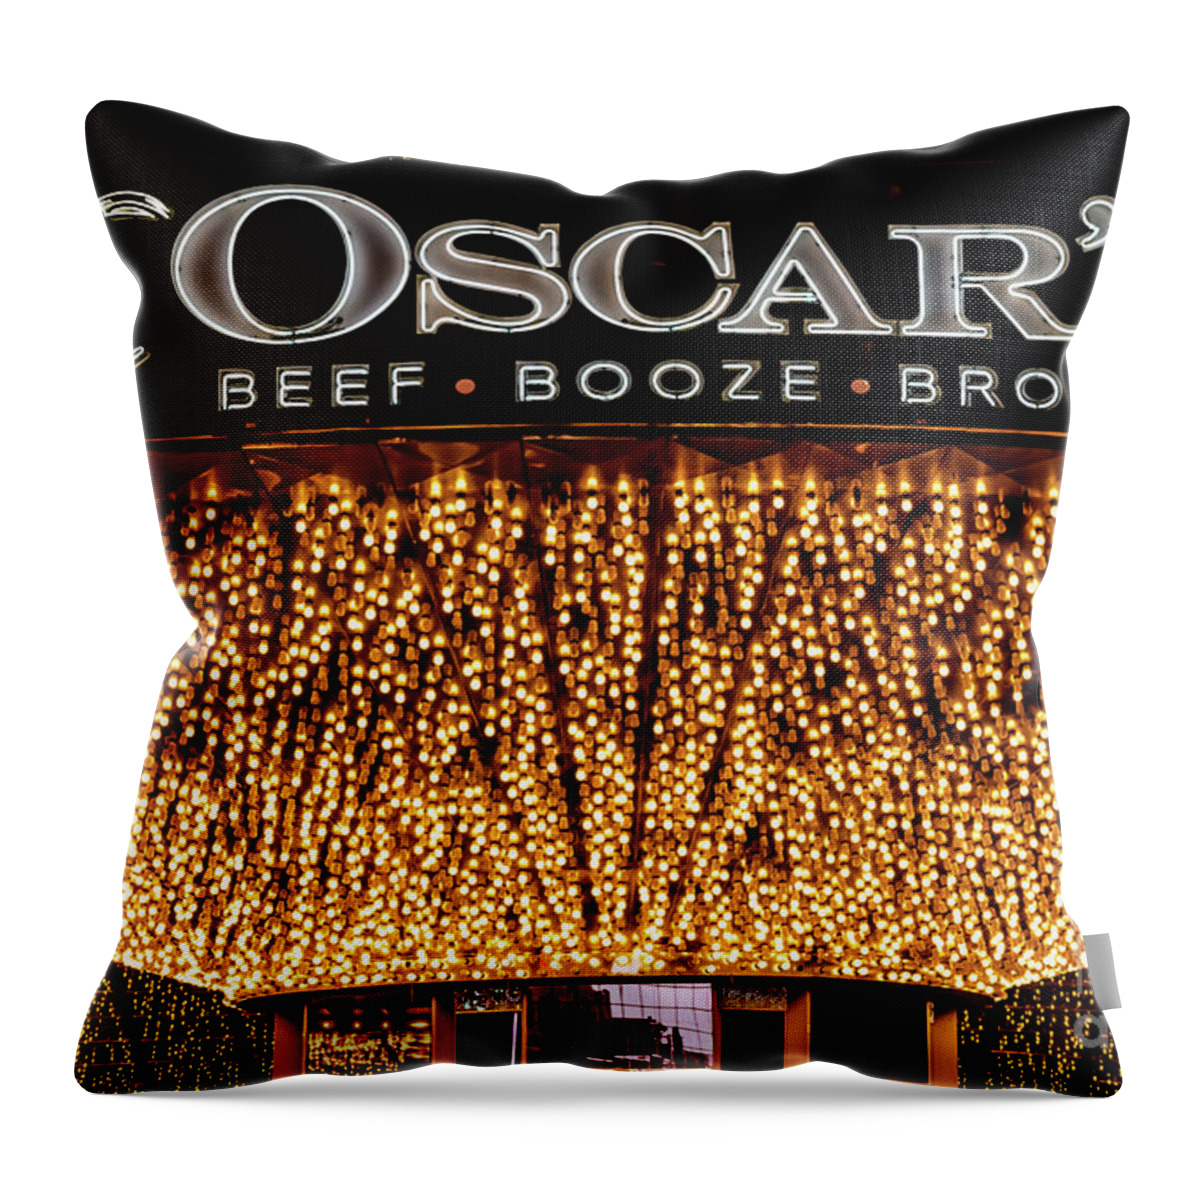 Oscars Las Vegas Throw Pillow featuring the photograph The Plaza Casino Oscars Lights and Sign at Night by Aloha Art